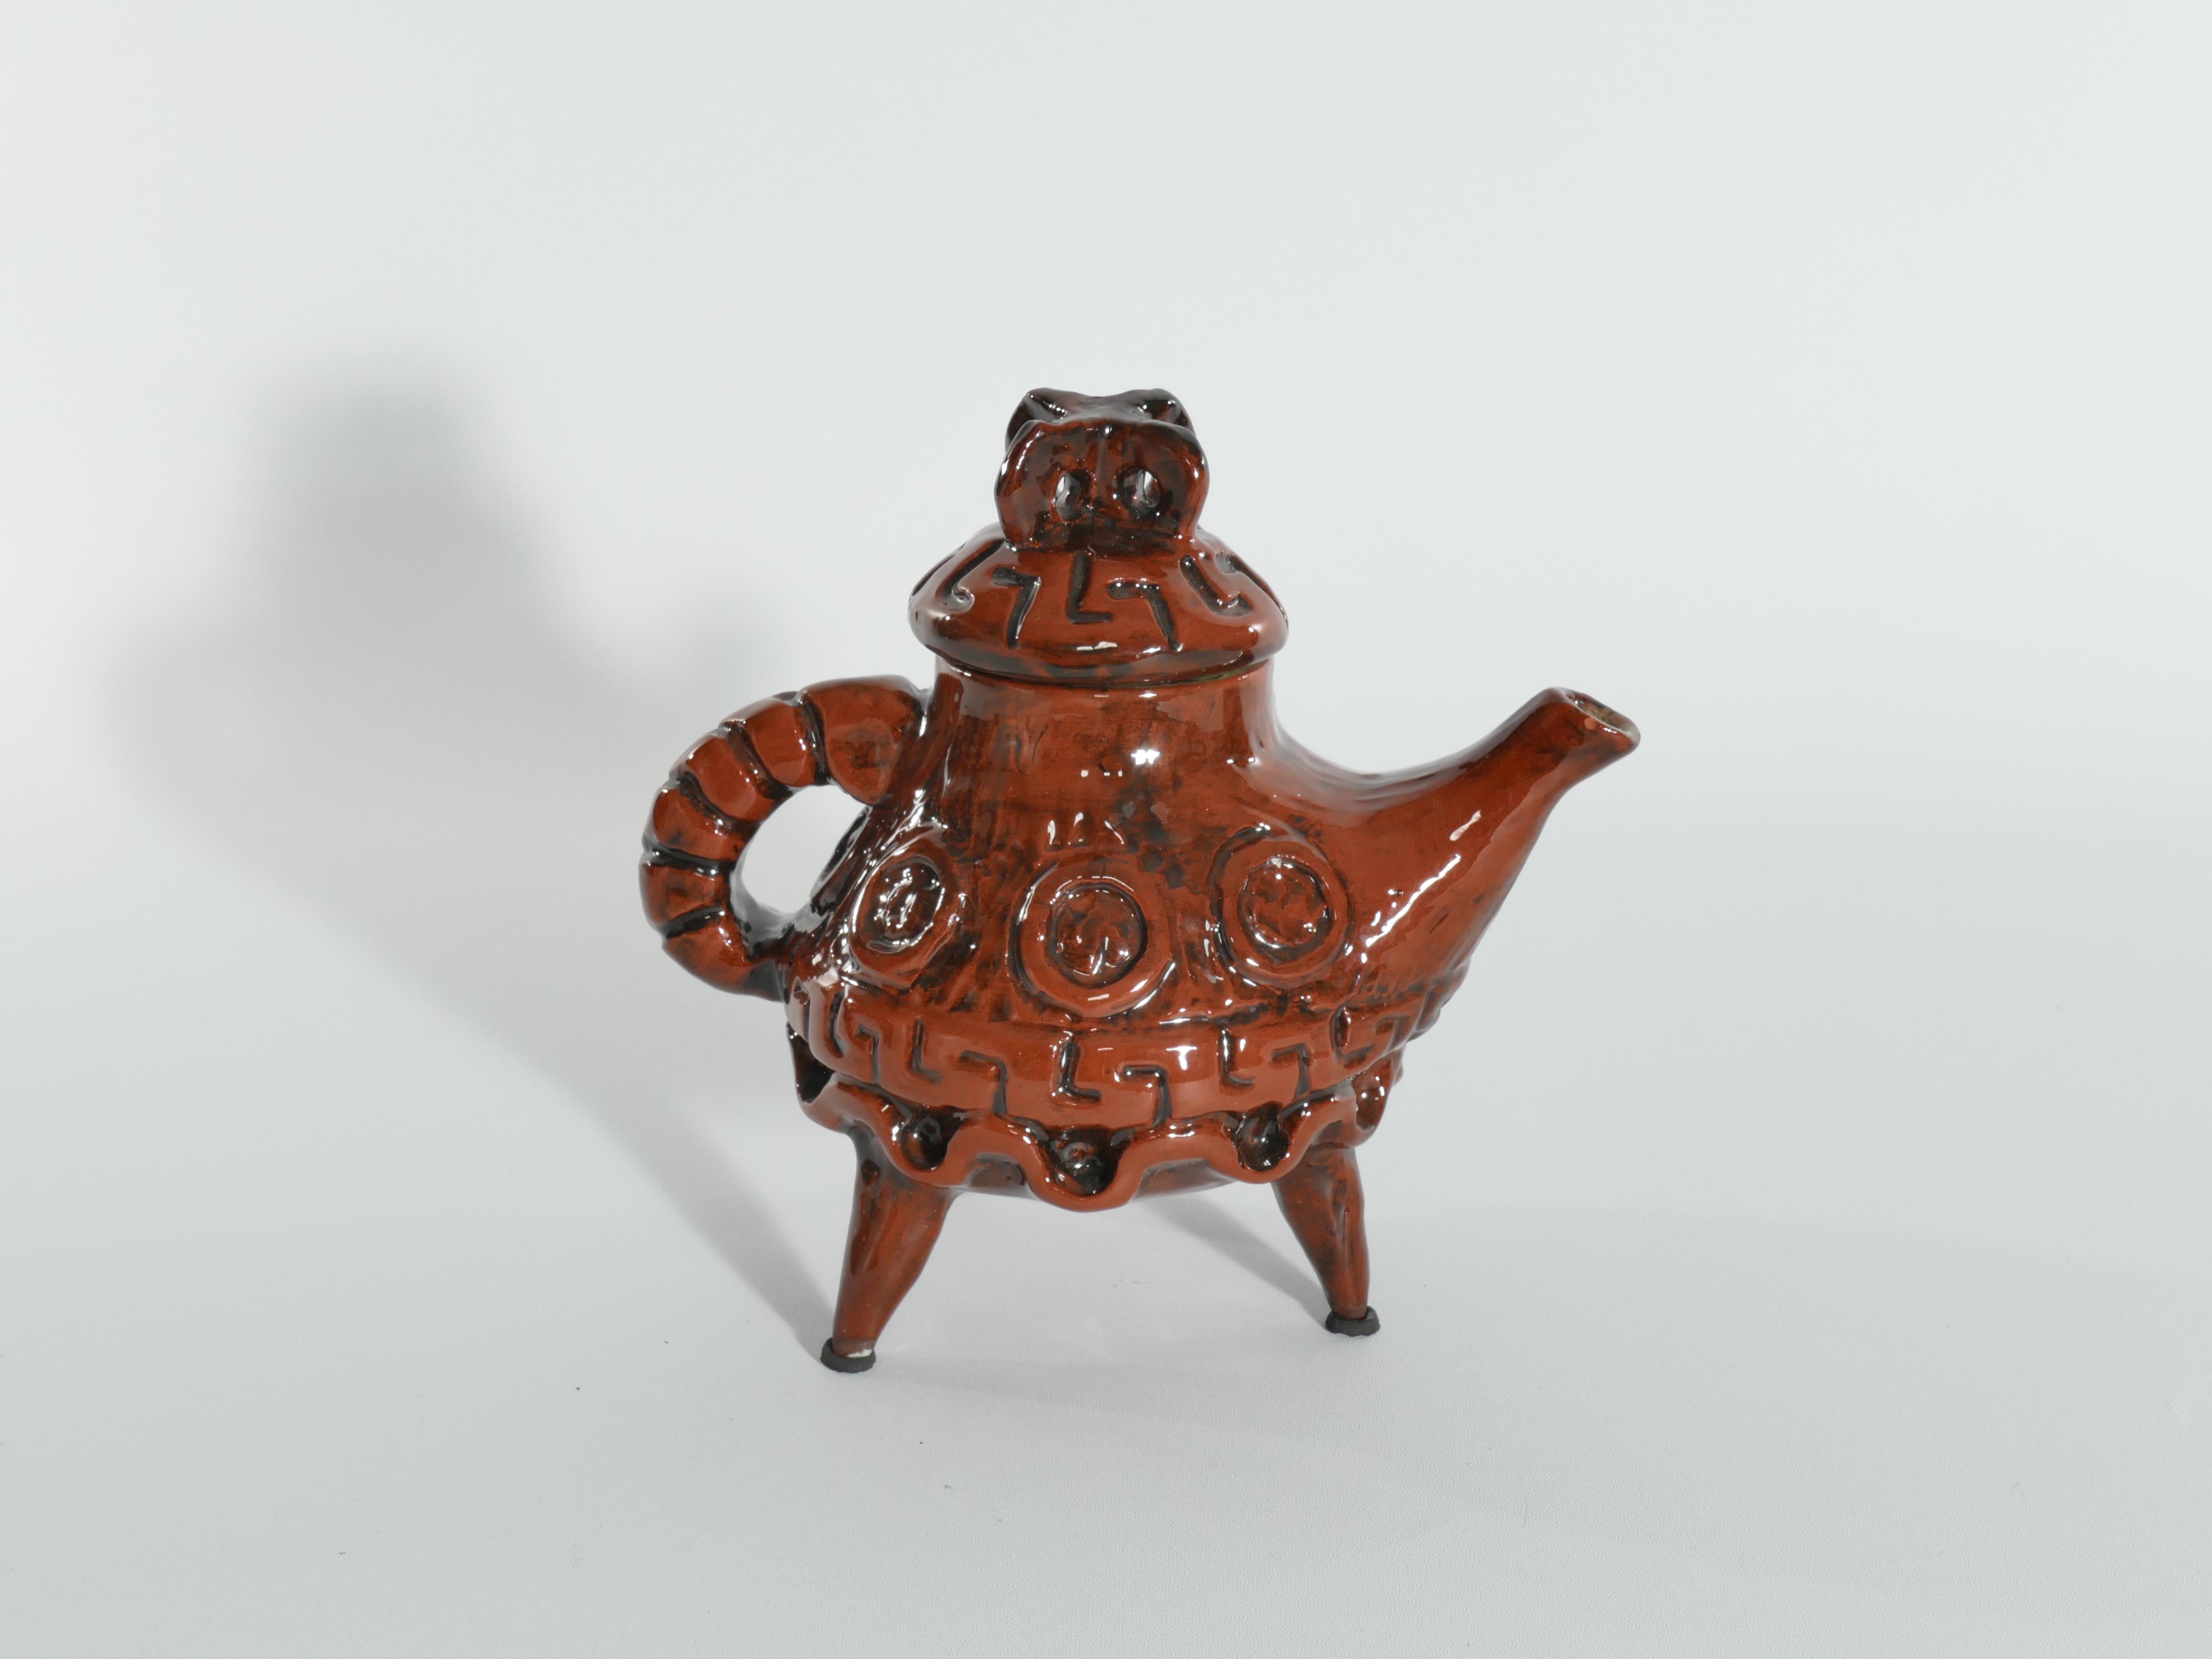 This playful and unique teapot, has different sides to it. Sometimes it looks like just a quirky tea pot with a bright green inside. But in the view from some angles , this three legged teapot looks like an crab ready to run away! 

Allan Hellman